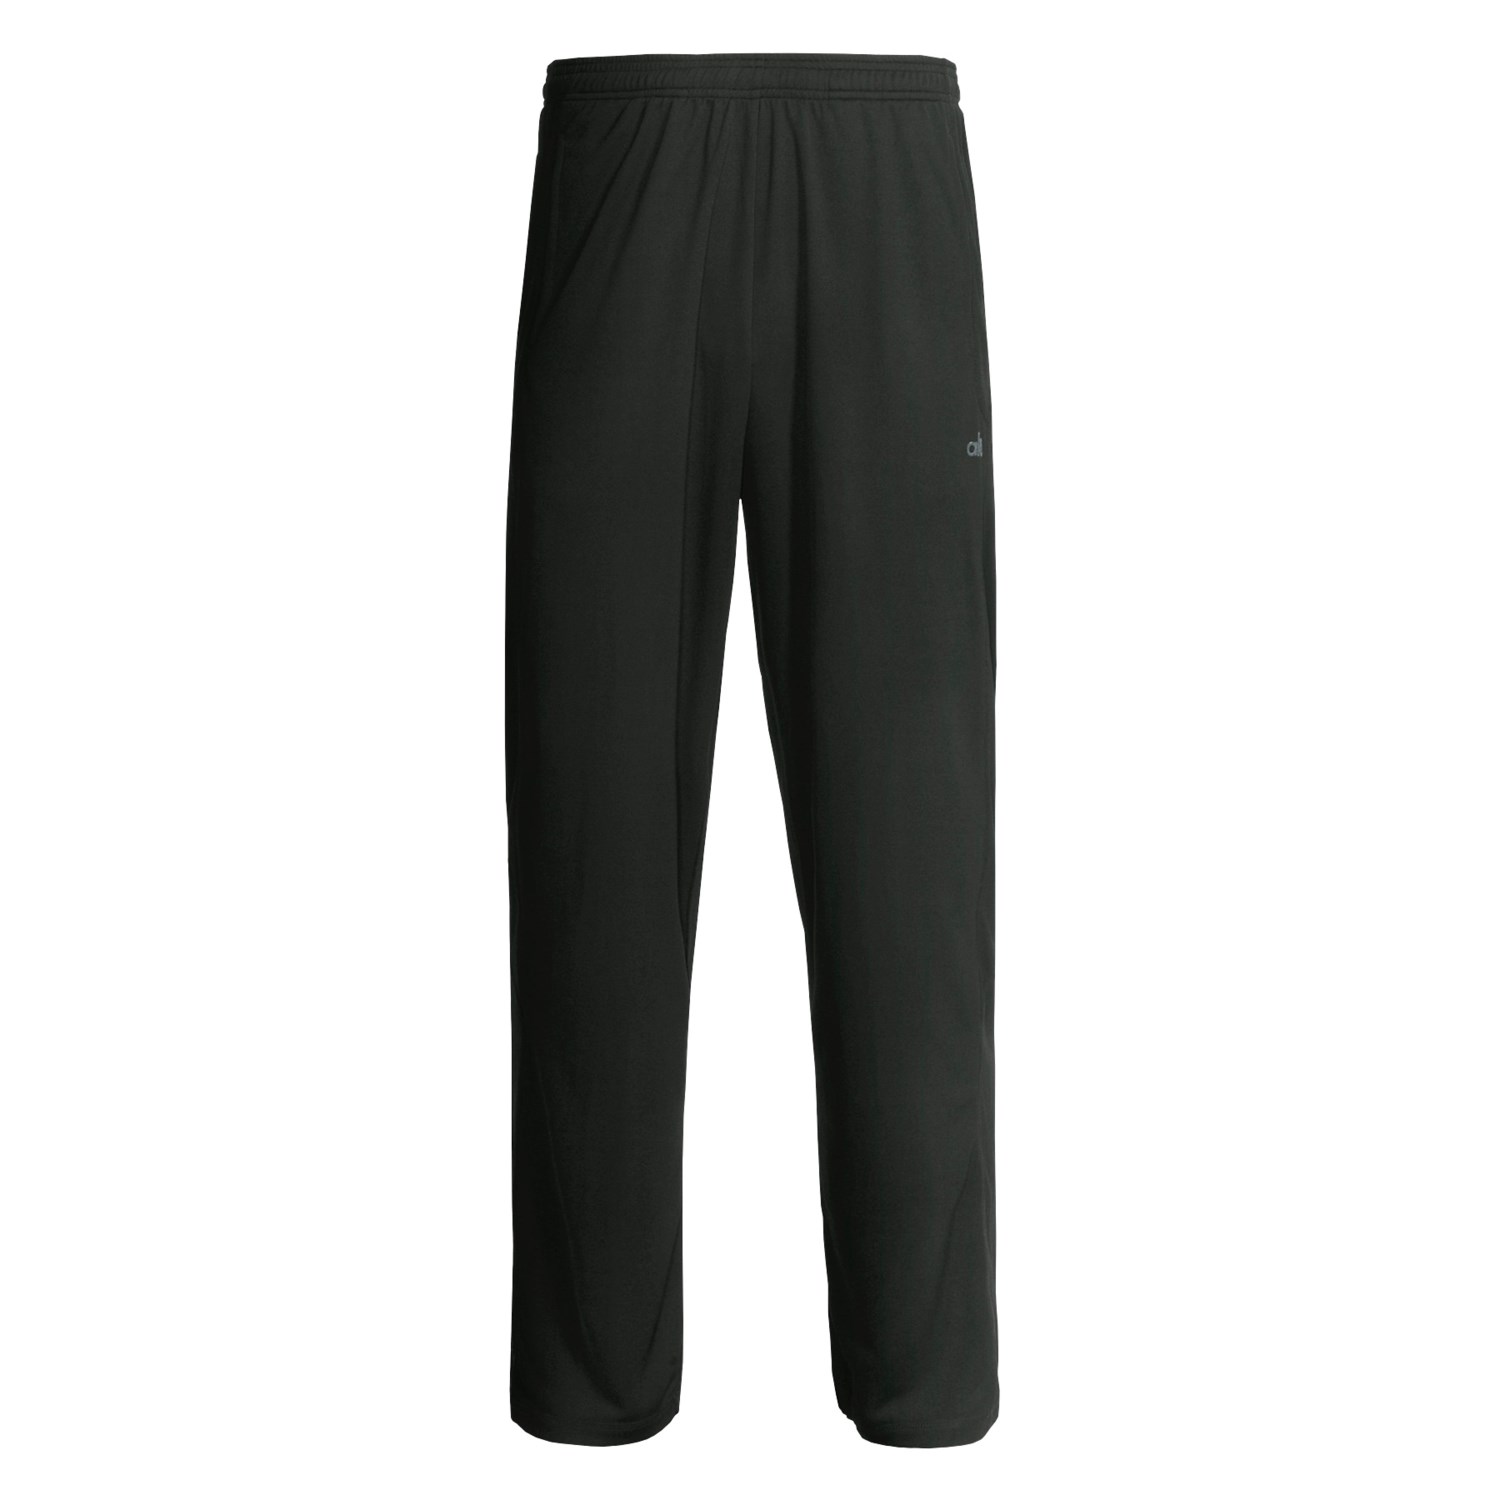 Alo Recovery Pants (For Men) 2316U - Save 53%